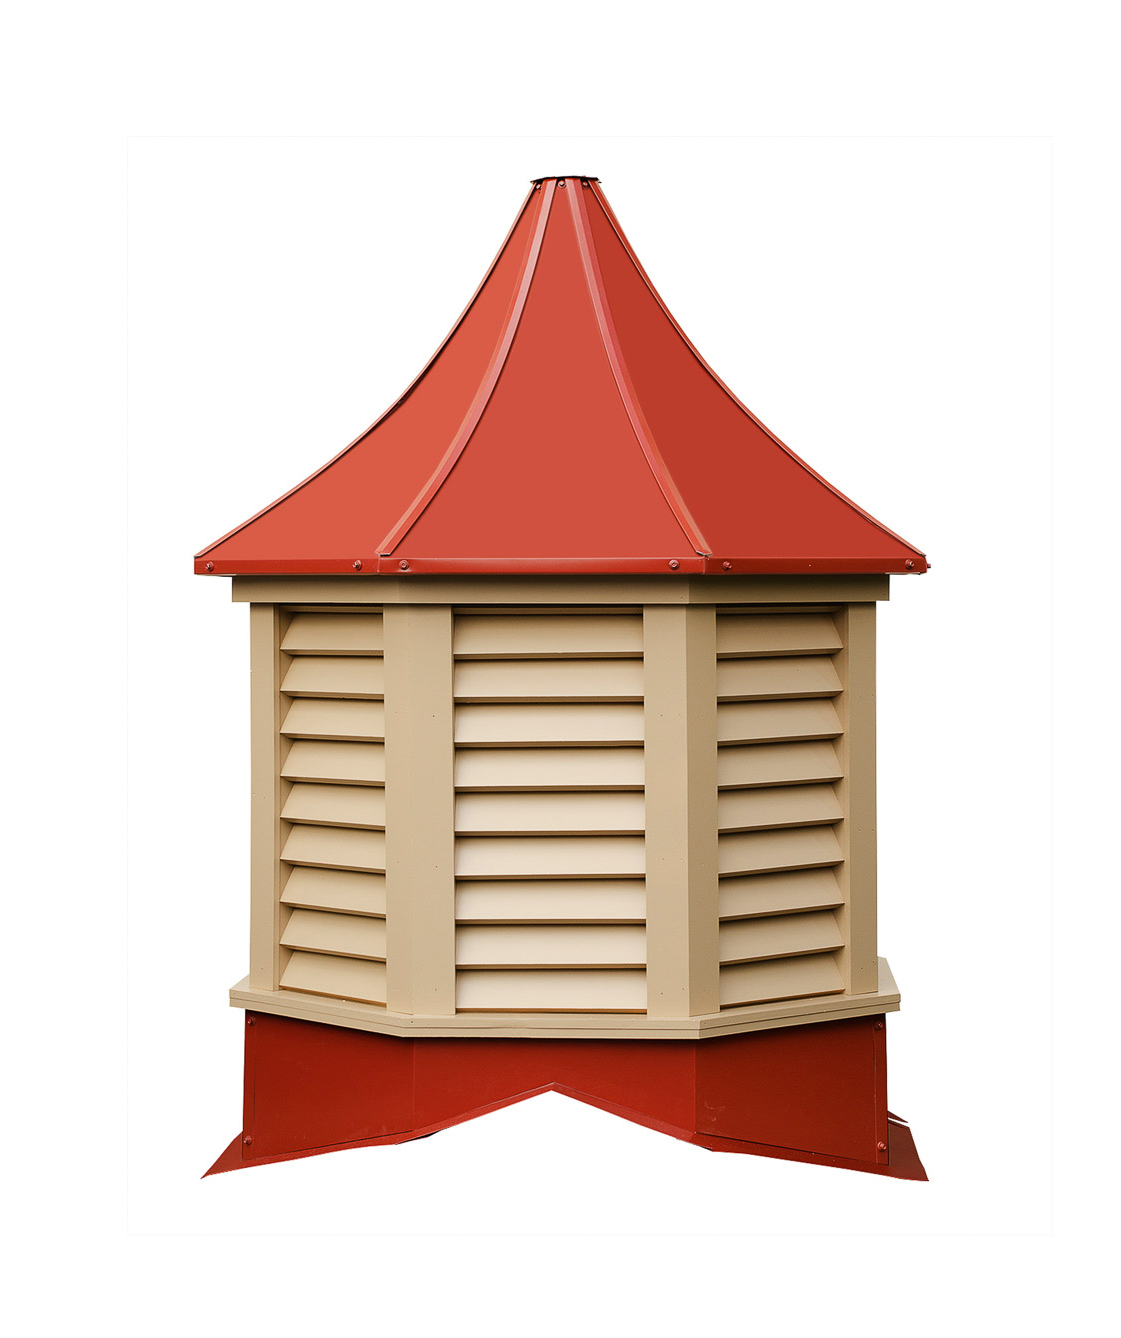 Millennial Series Cupolas - Norwell Octagon With Louvers